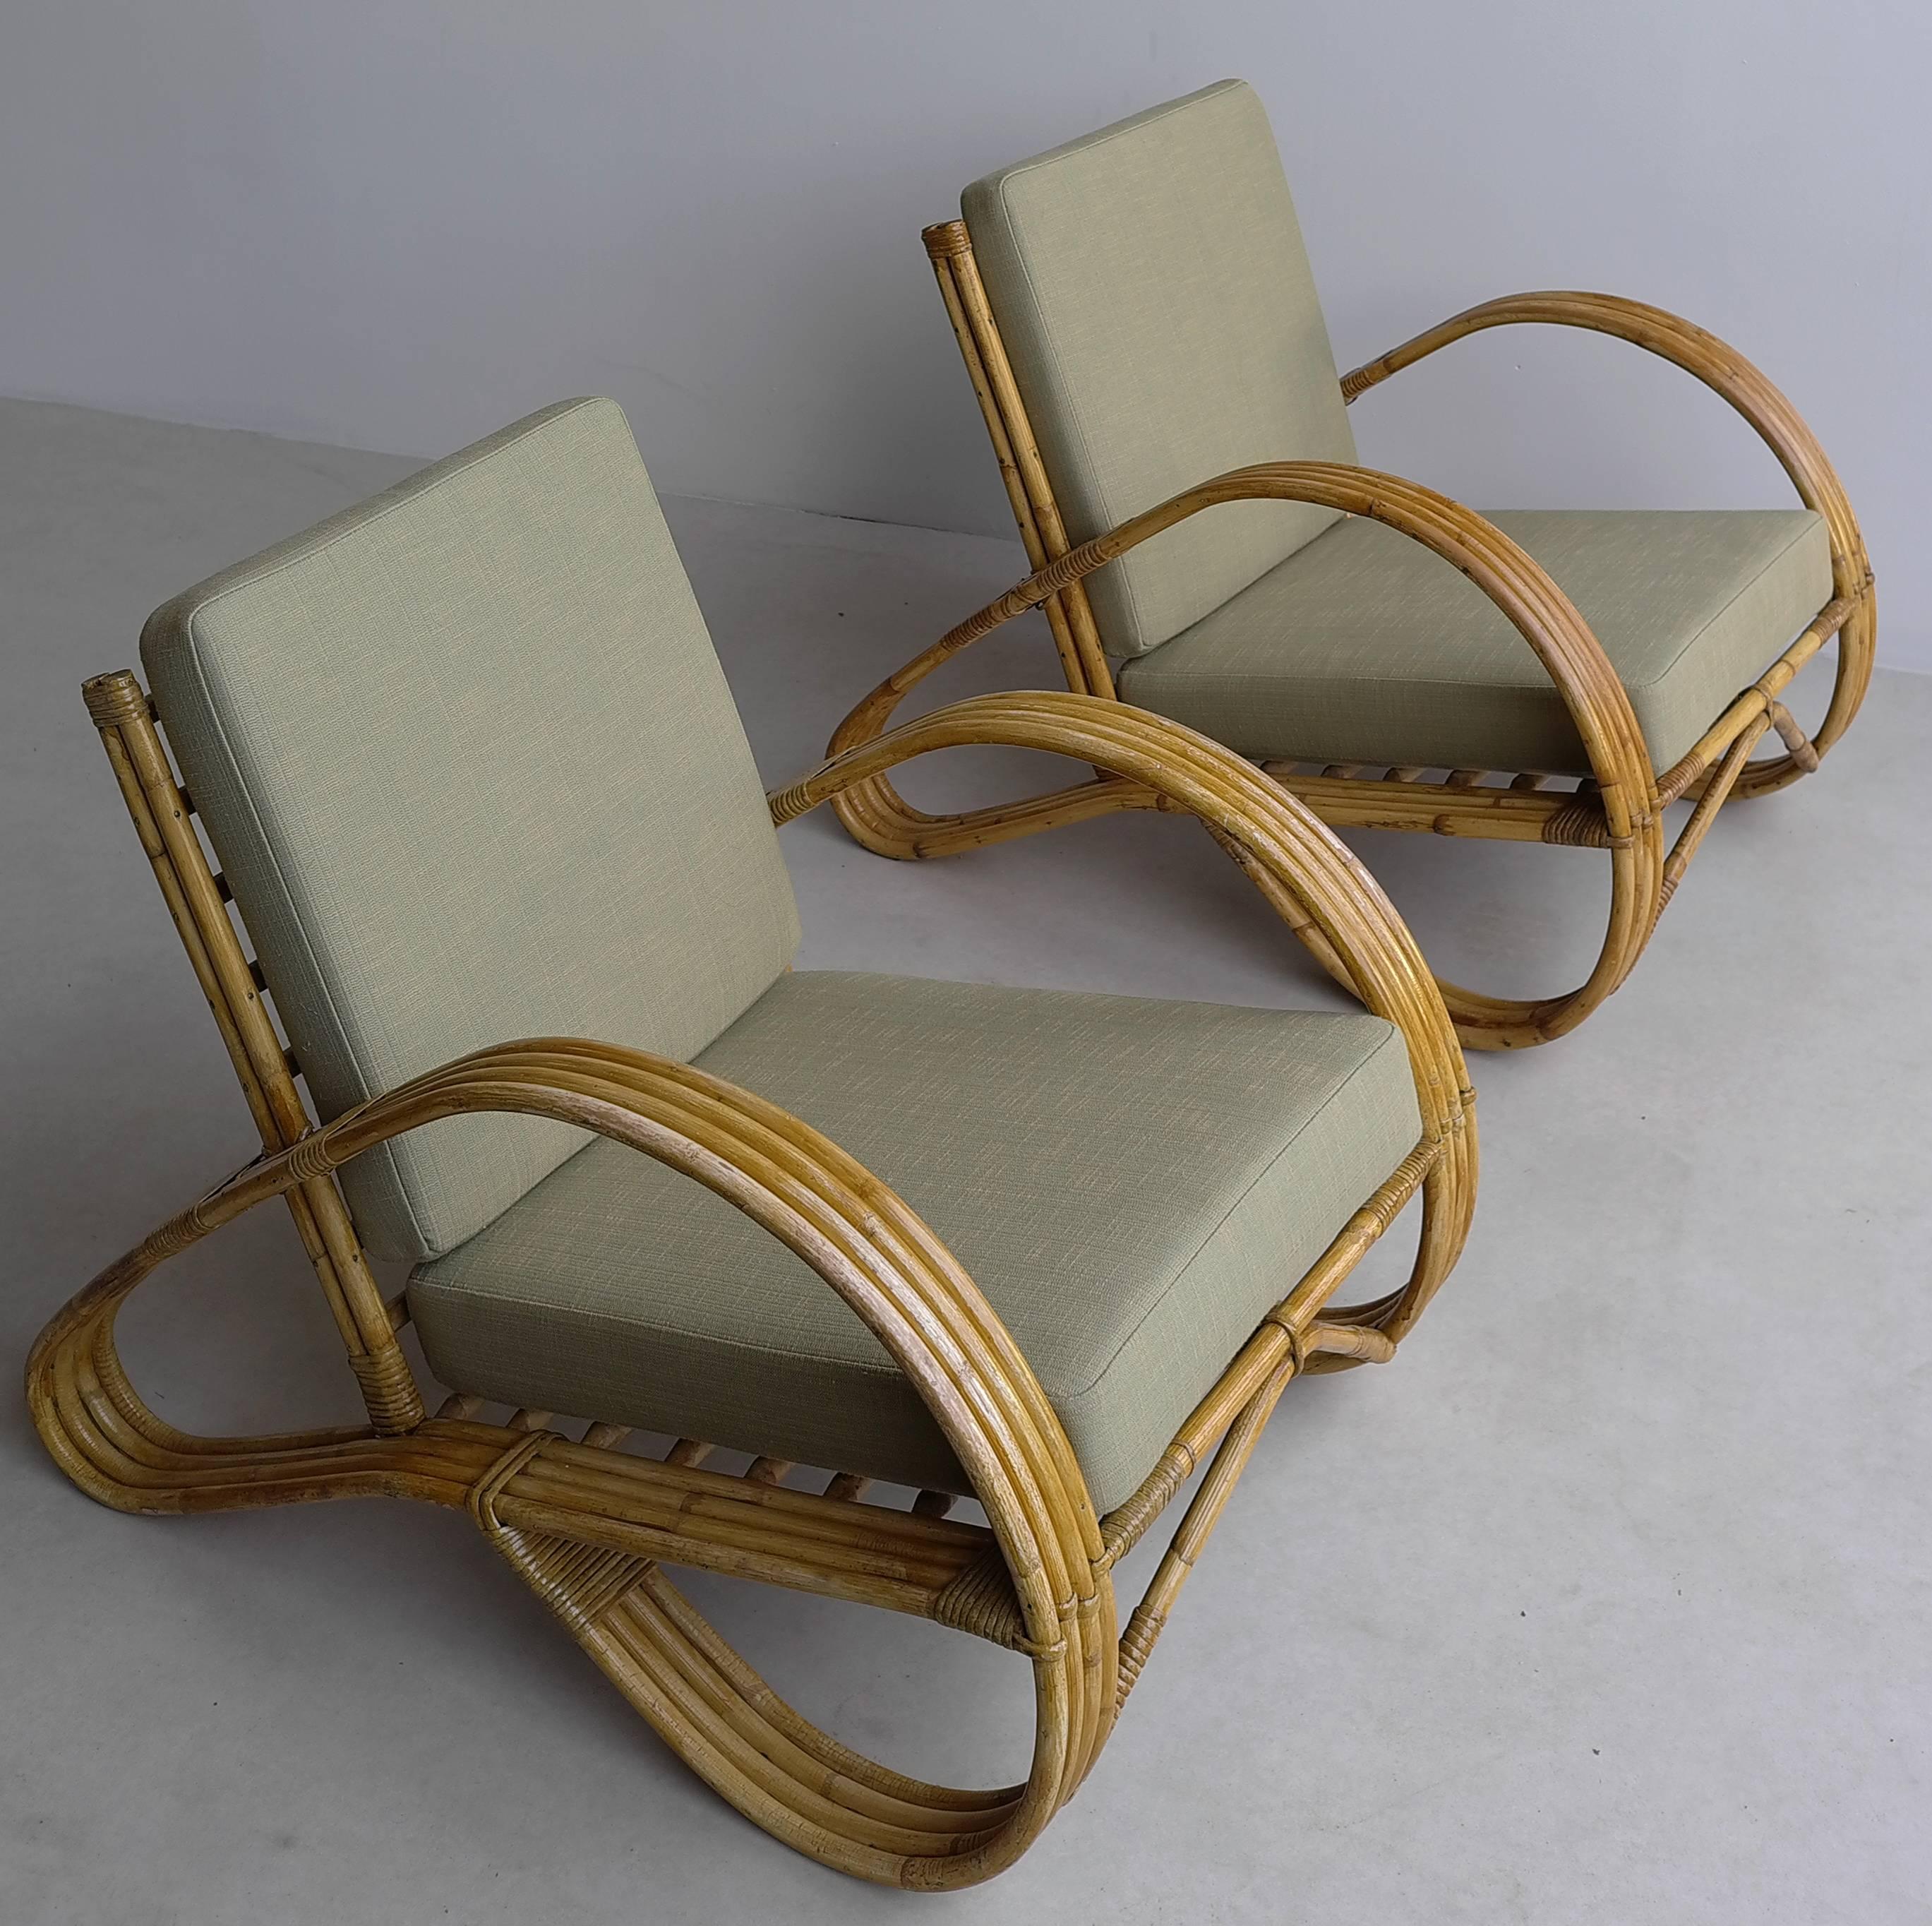 Pair of sculptural bamboo armchairs, 1950s.

These chairs would look great inside an interior or outside on a porch. The chairs are newly upholstered in green fabric.